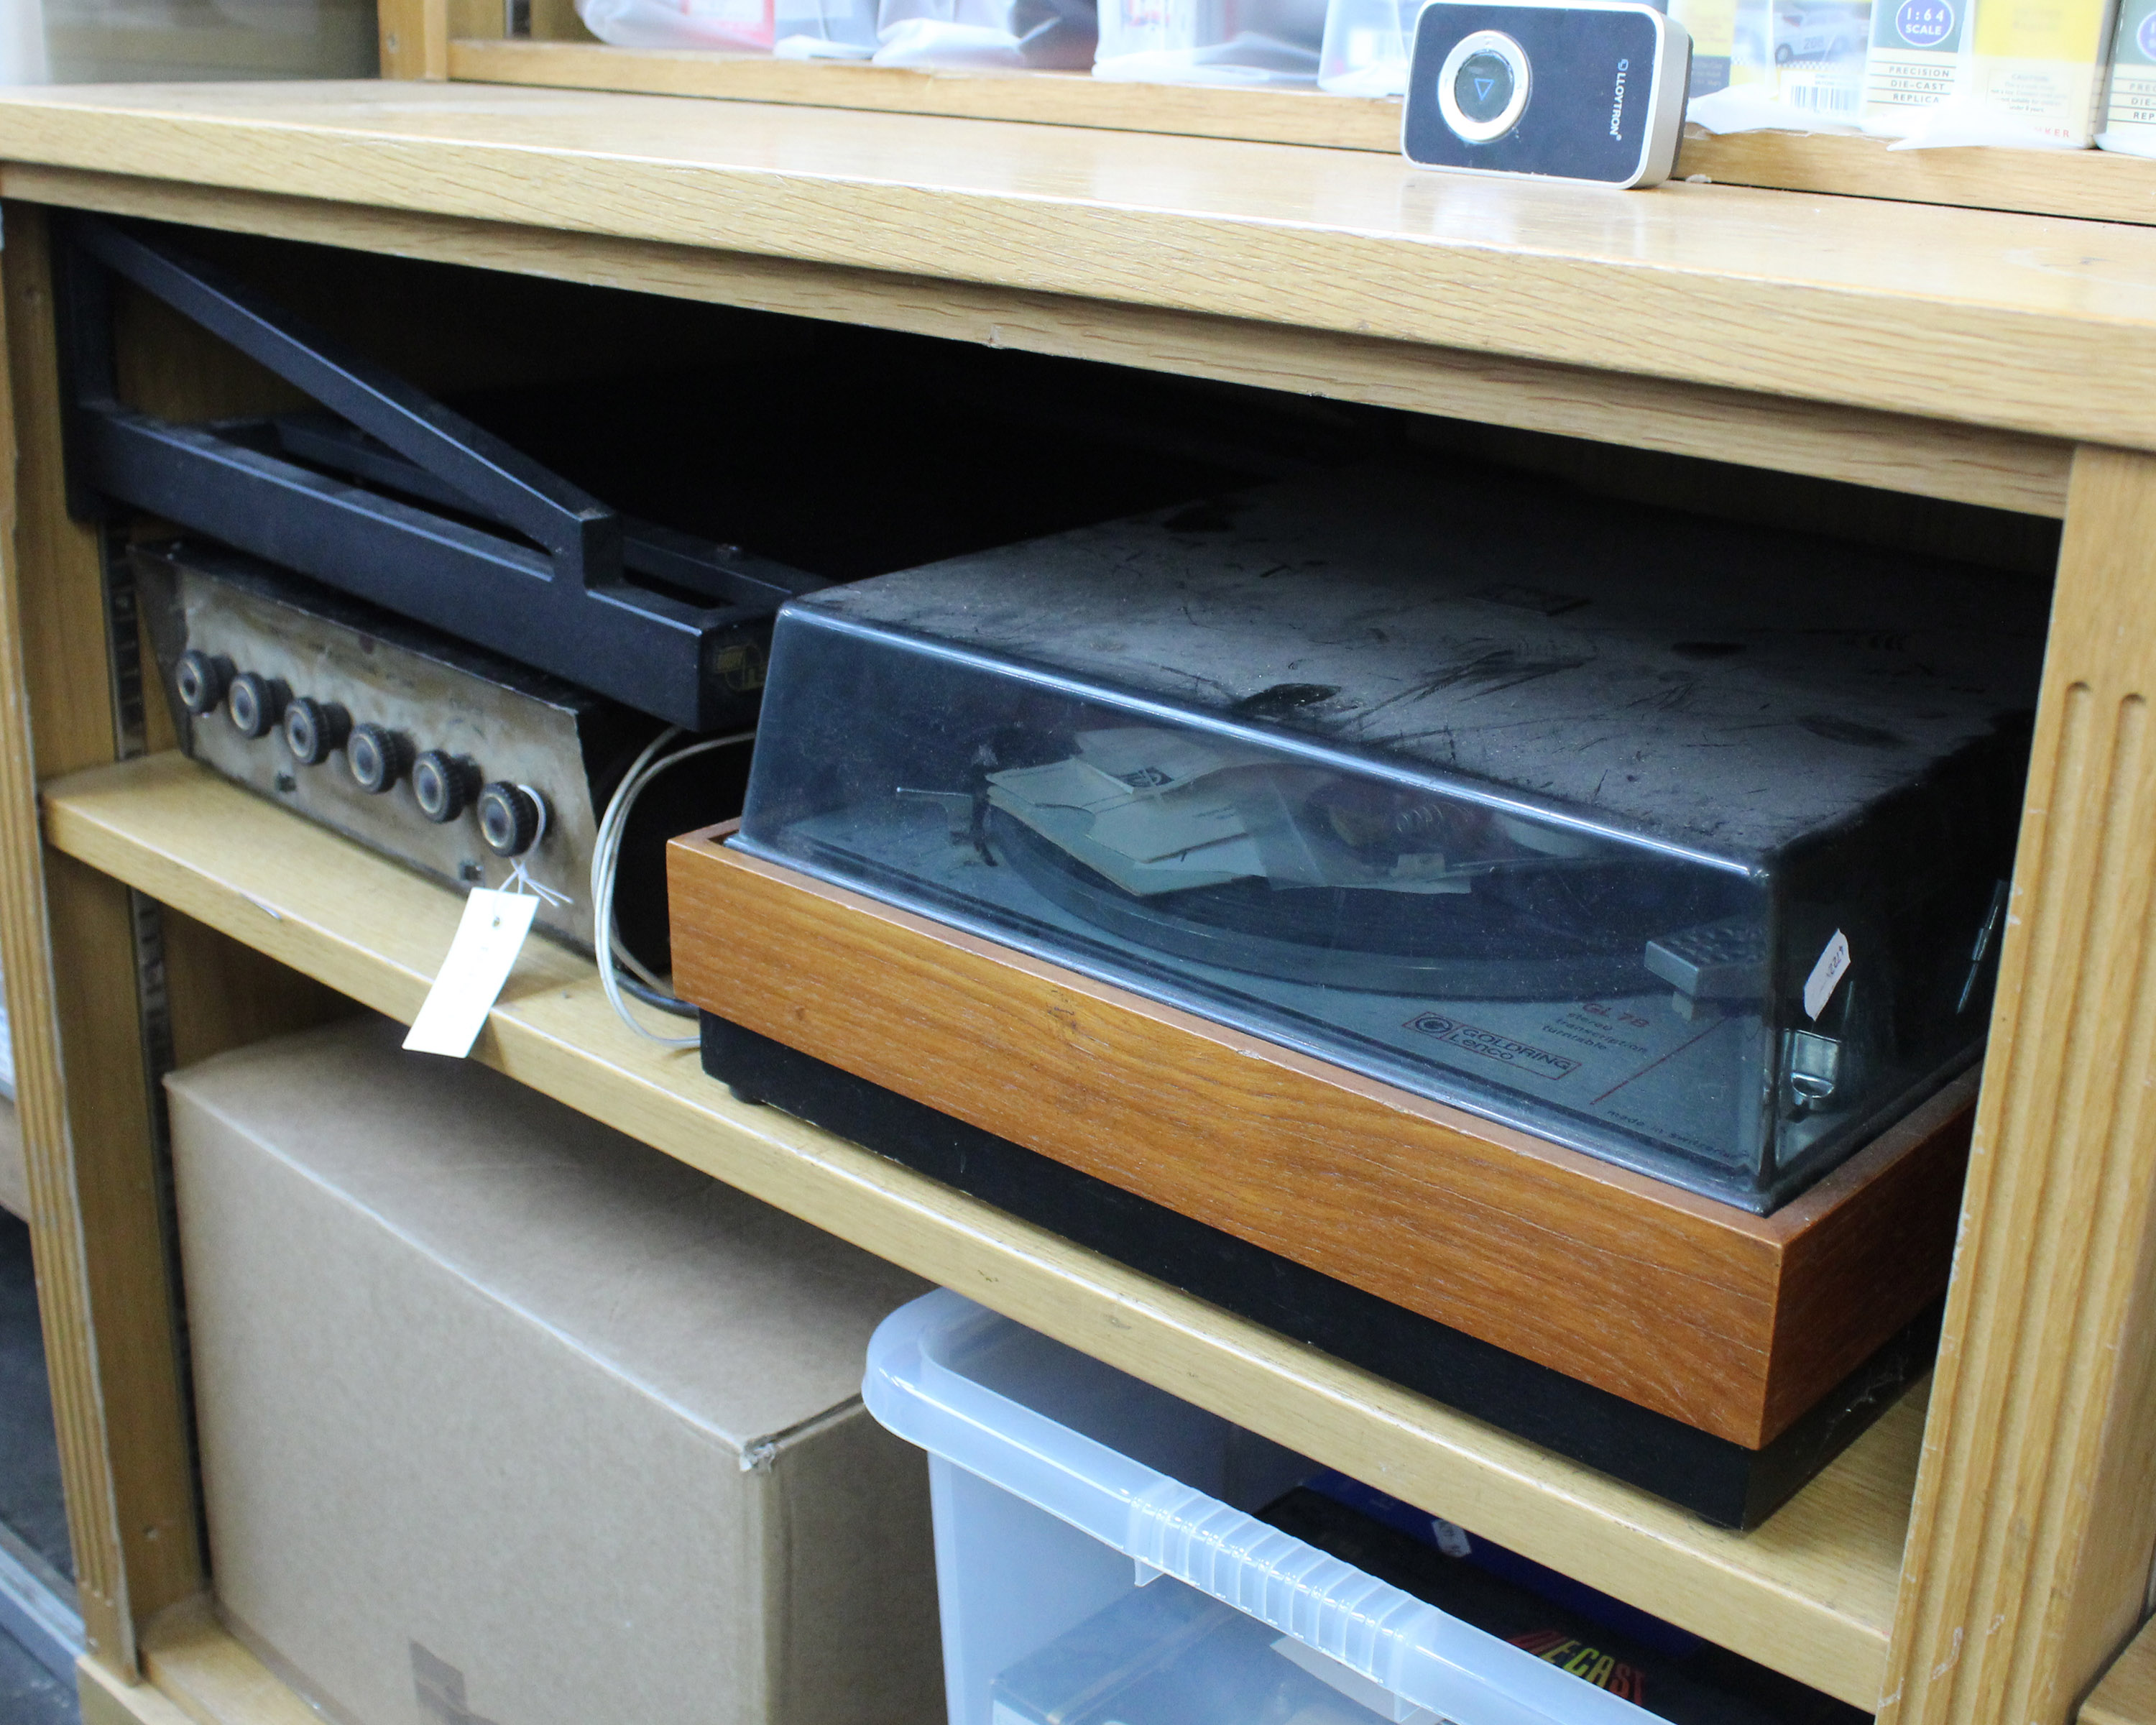 A Goldring Lenco GL78 Turntable, Pamphonic Stereo and Target Audio Wall Mount (Untested, As Found)